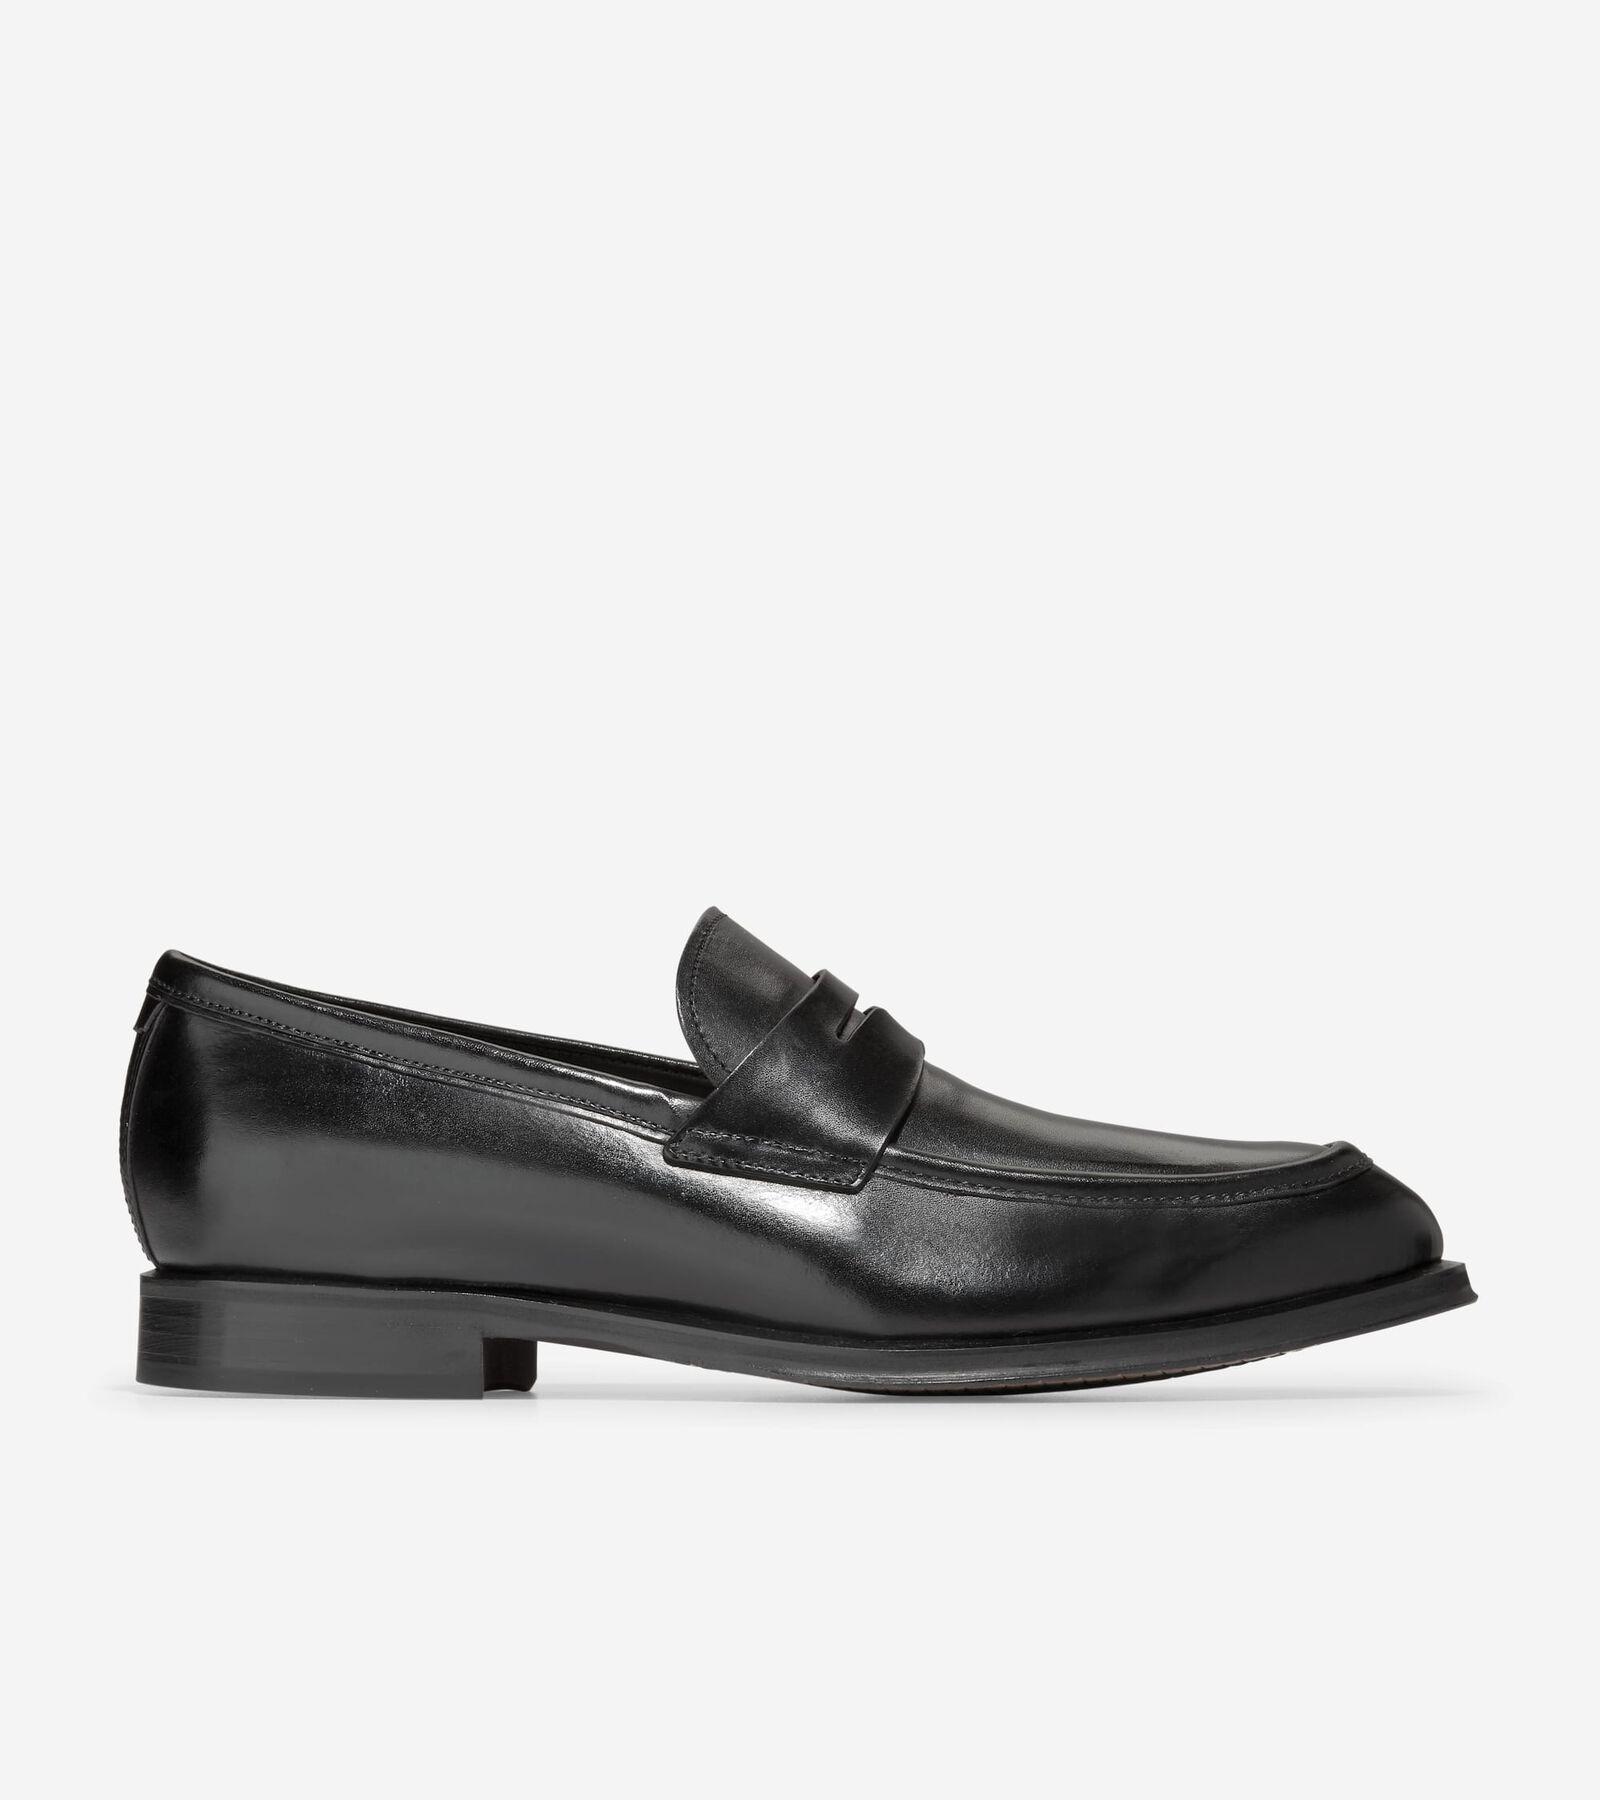 Cole Haan Men's Modern Classics Penny Loafer - Size: 7.5 Product Image